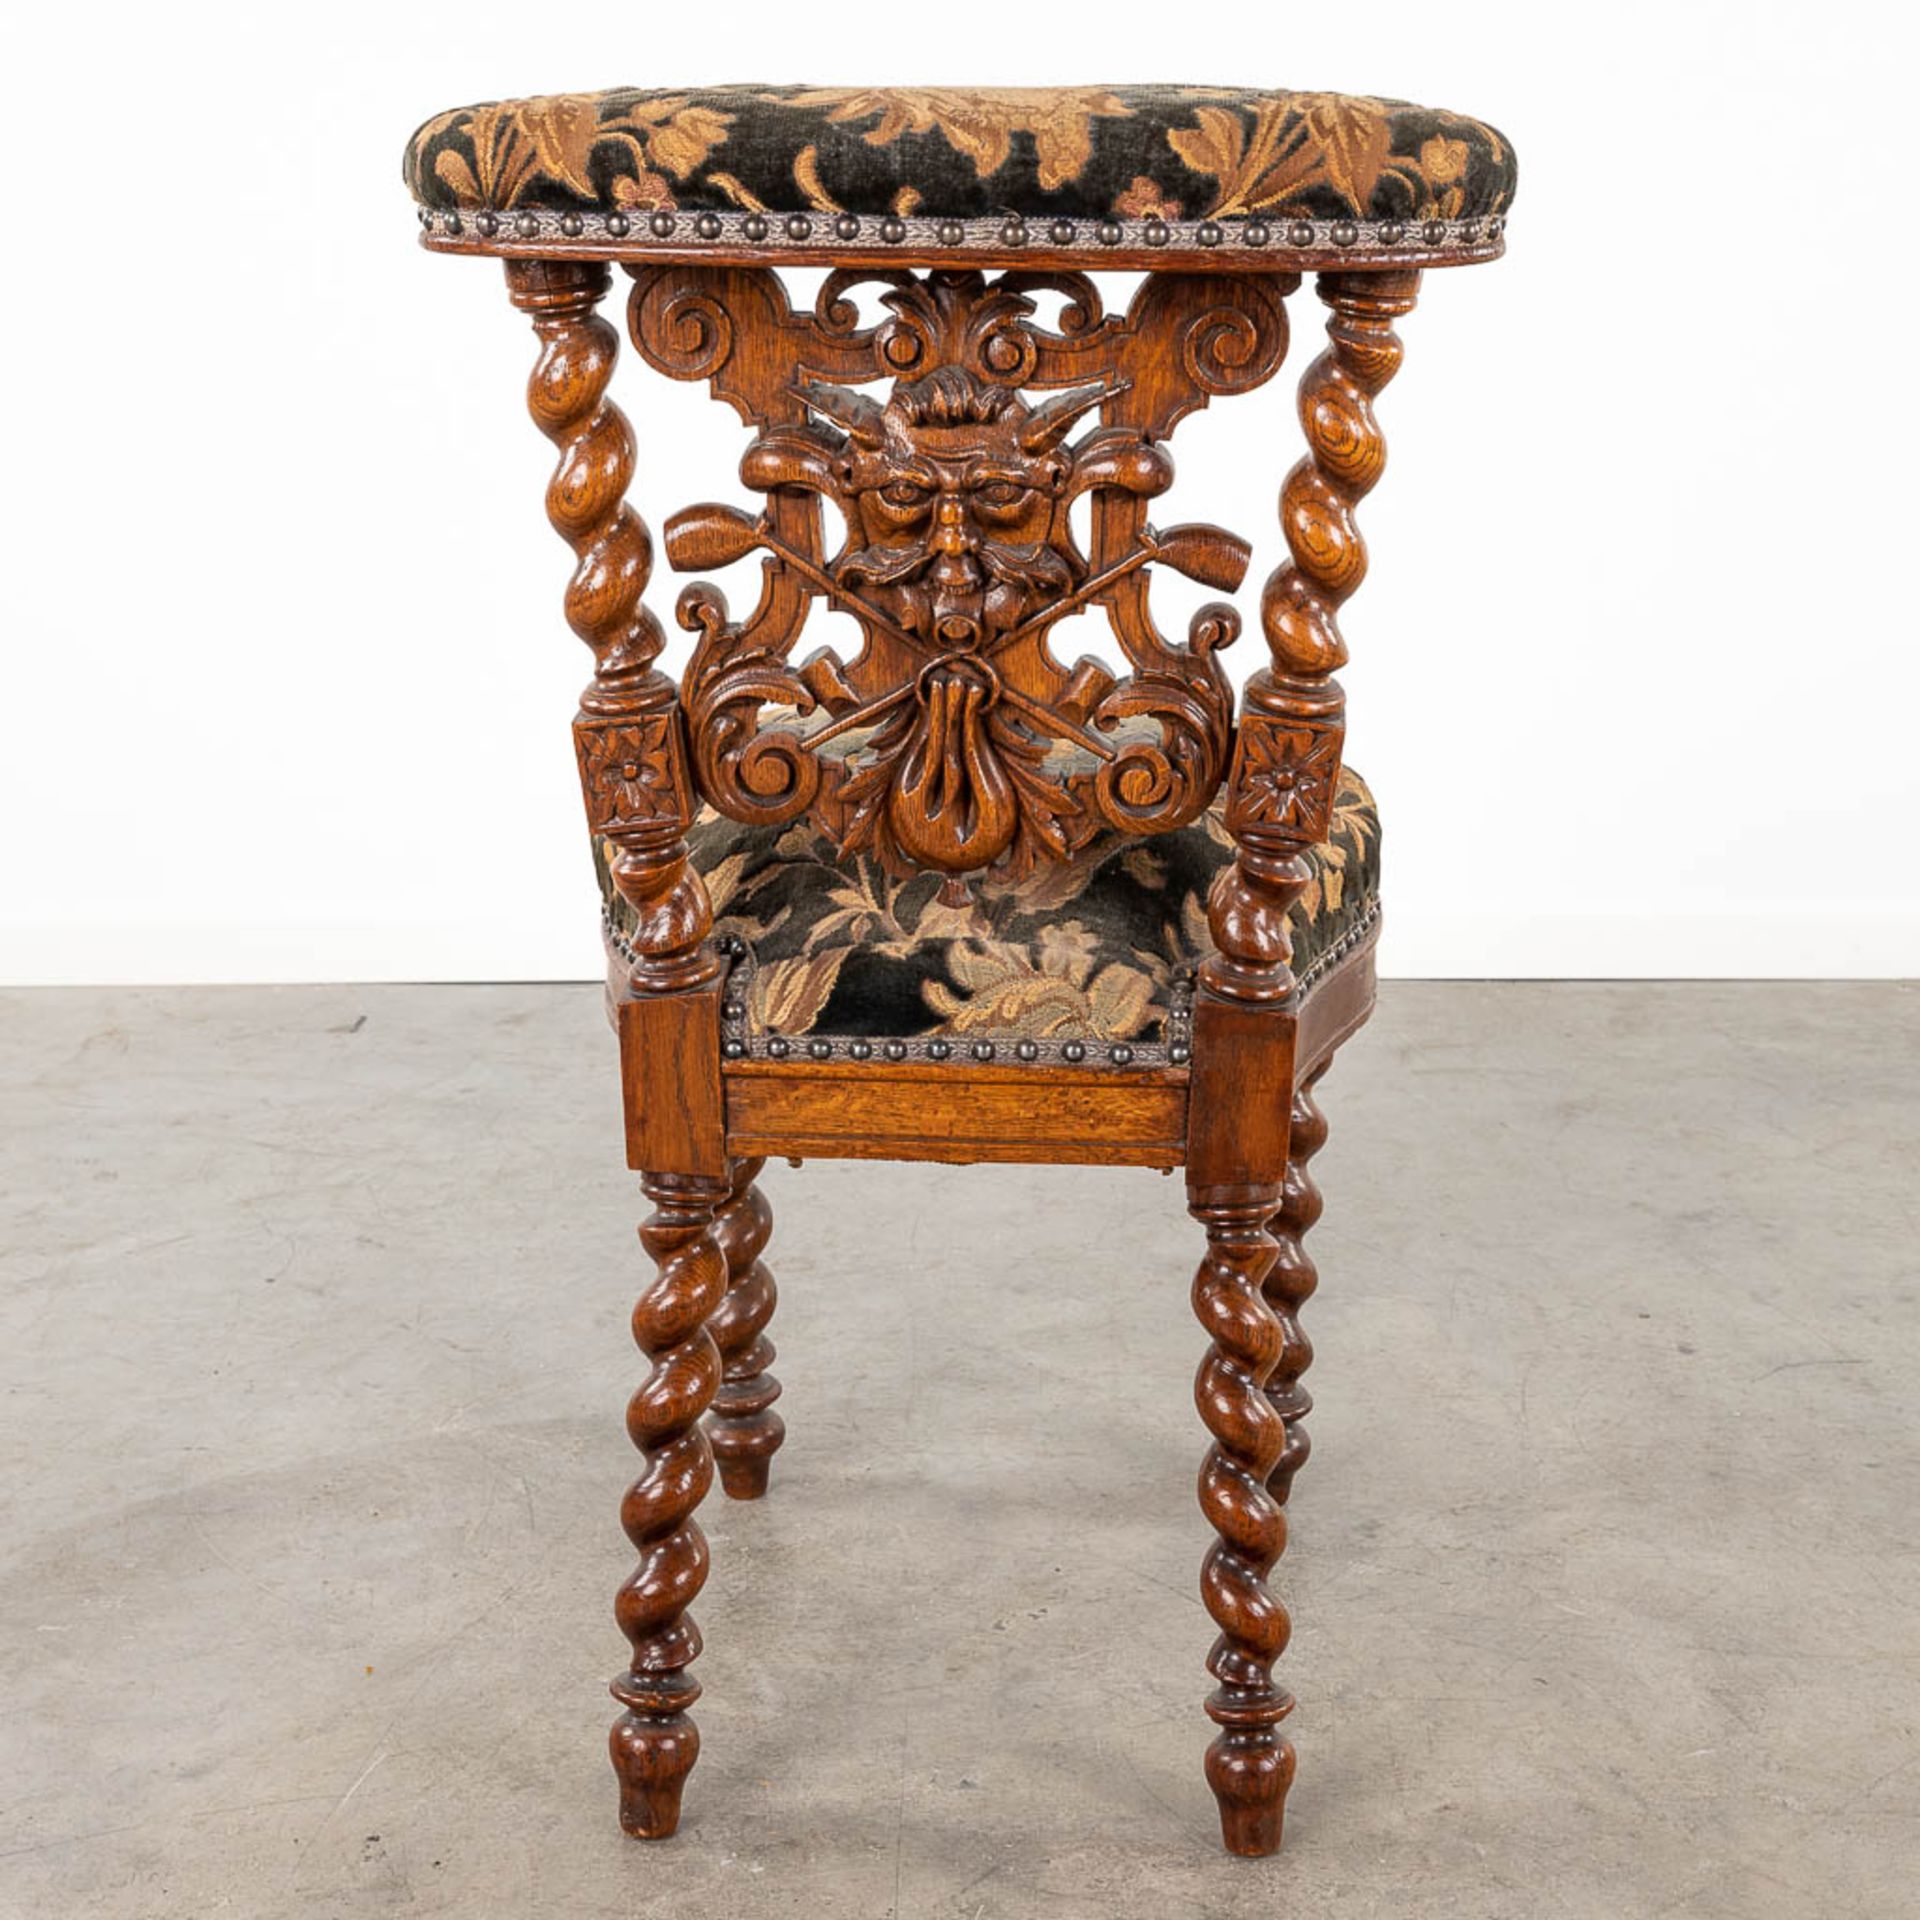 A set of 4 antique wood-sculptured smoker's chairs, oak. Circa 1900. (L:55 x W:44 x H:80 cm) - Image 8 of 15